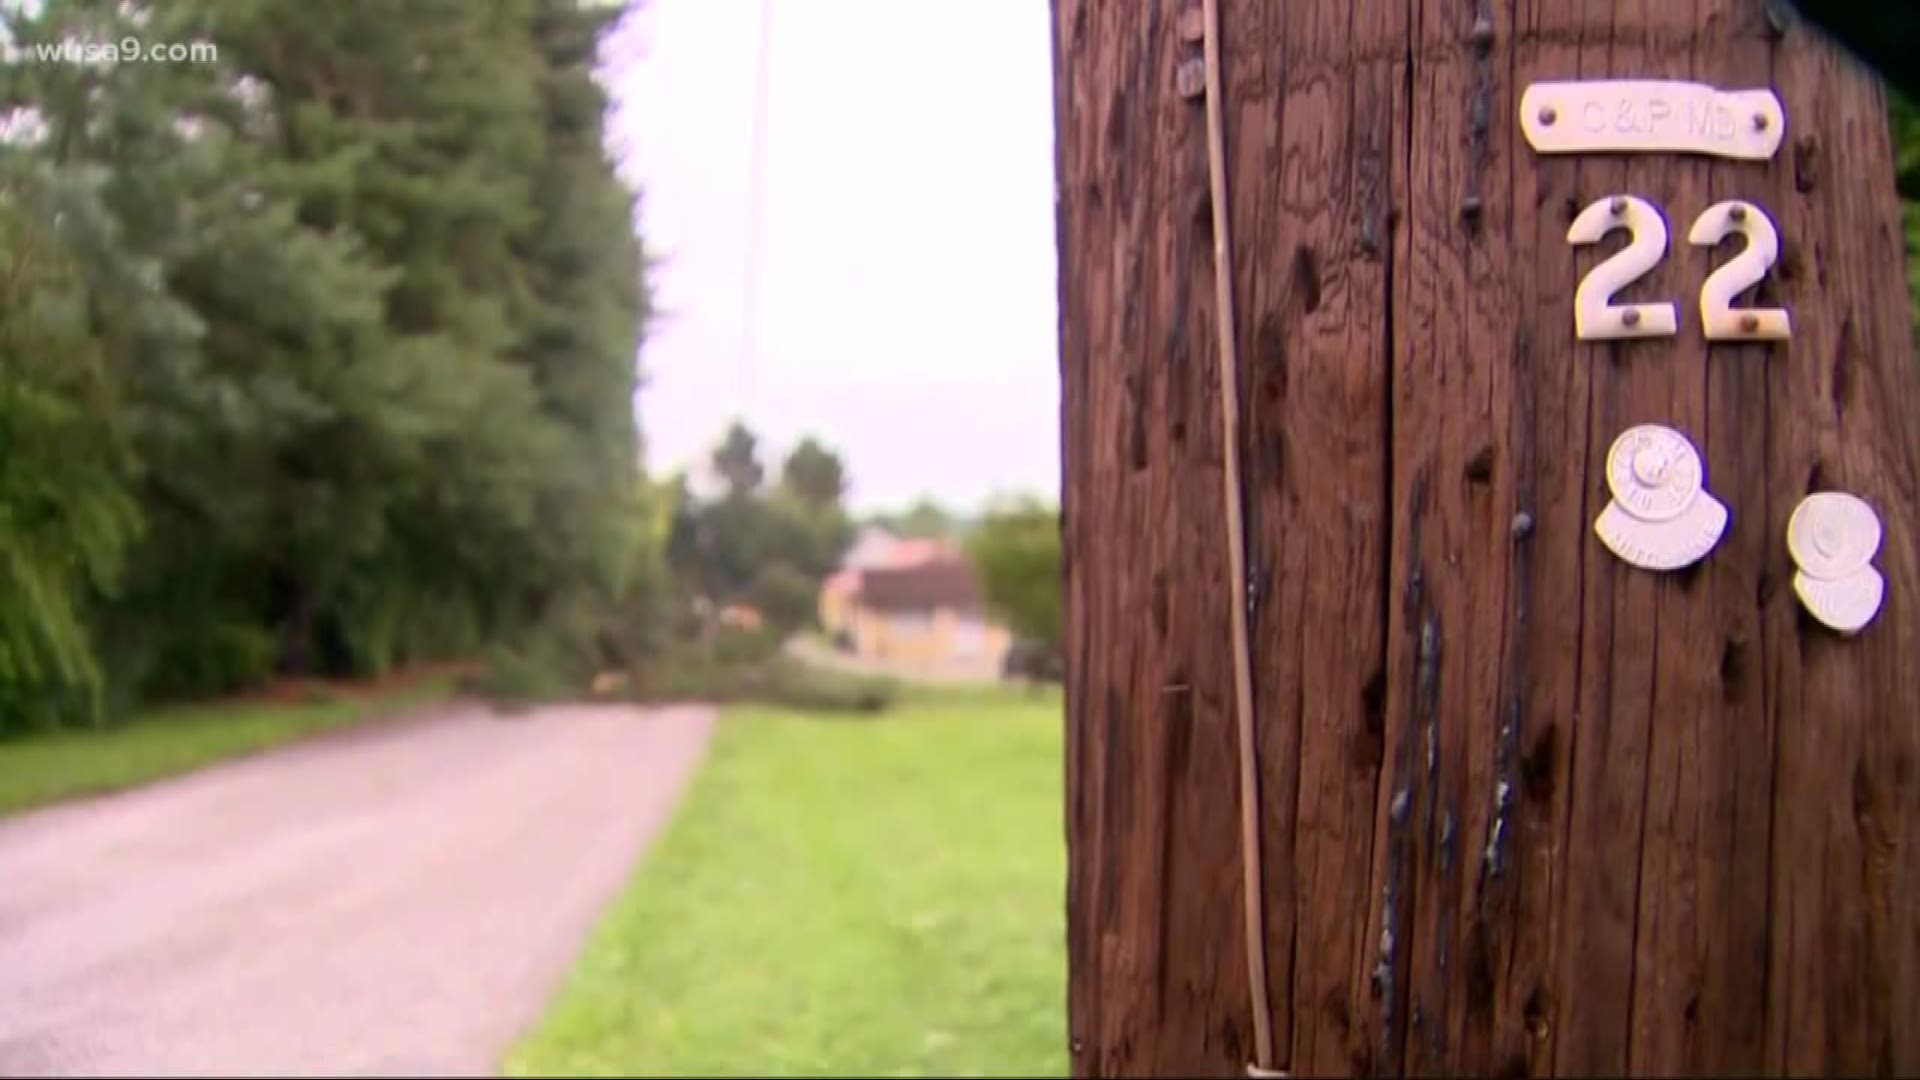 An 89-year-old man died after after a tree fell onto him in Carroll County, Maryland. He was outside after one the storms passed by. A tree limb came down and hit him.